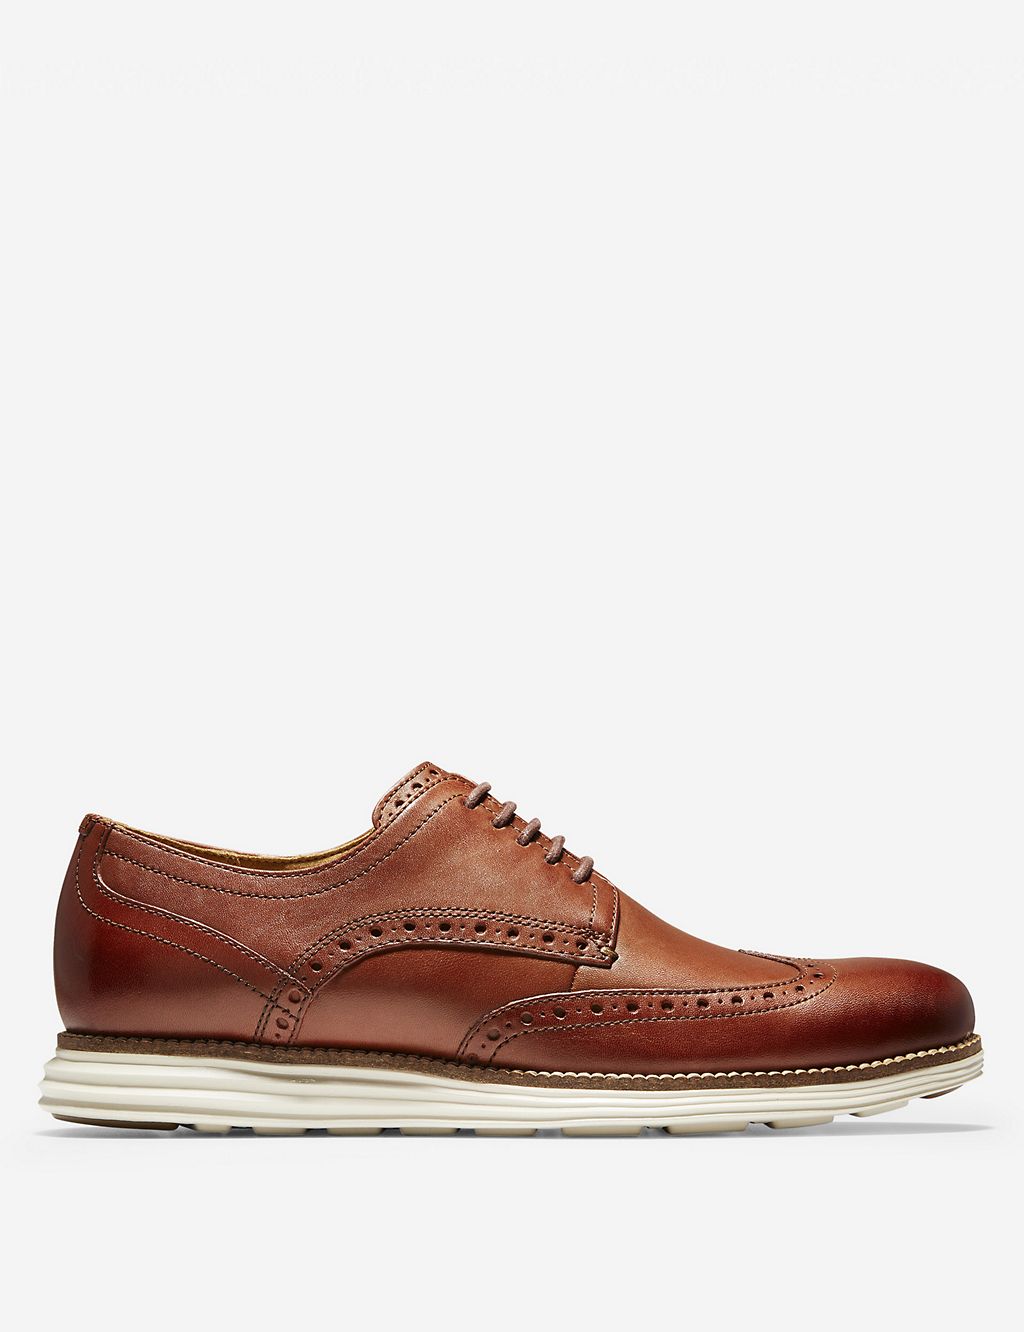 Originalgrand Wide Fit Leather Oxford Shoes 3 of 5